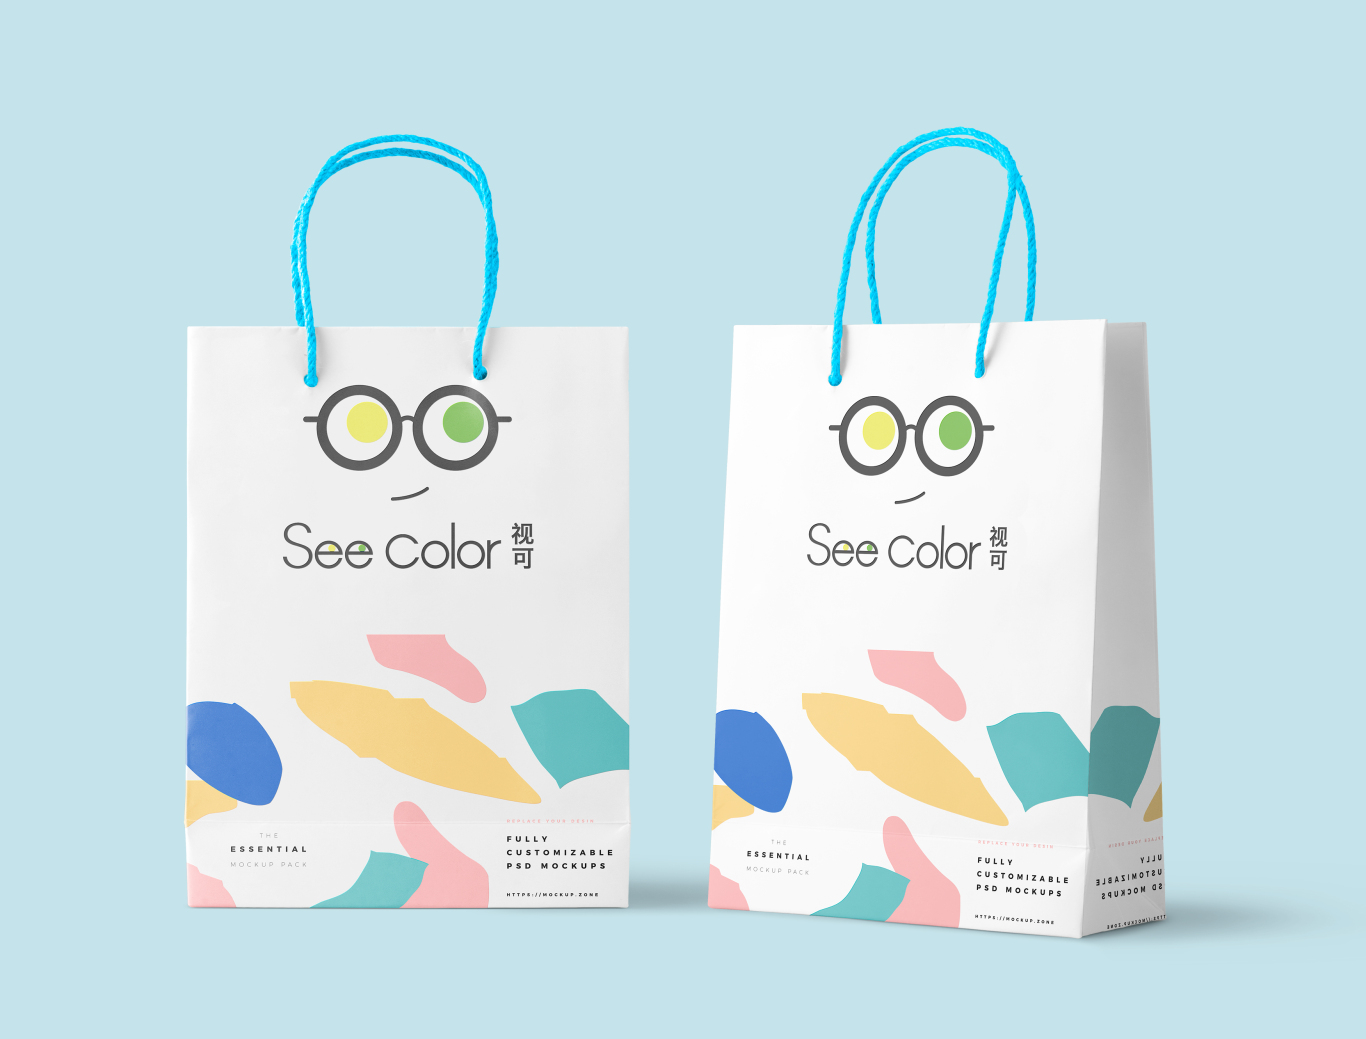 see color眼镜品牌logo设计图2